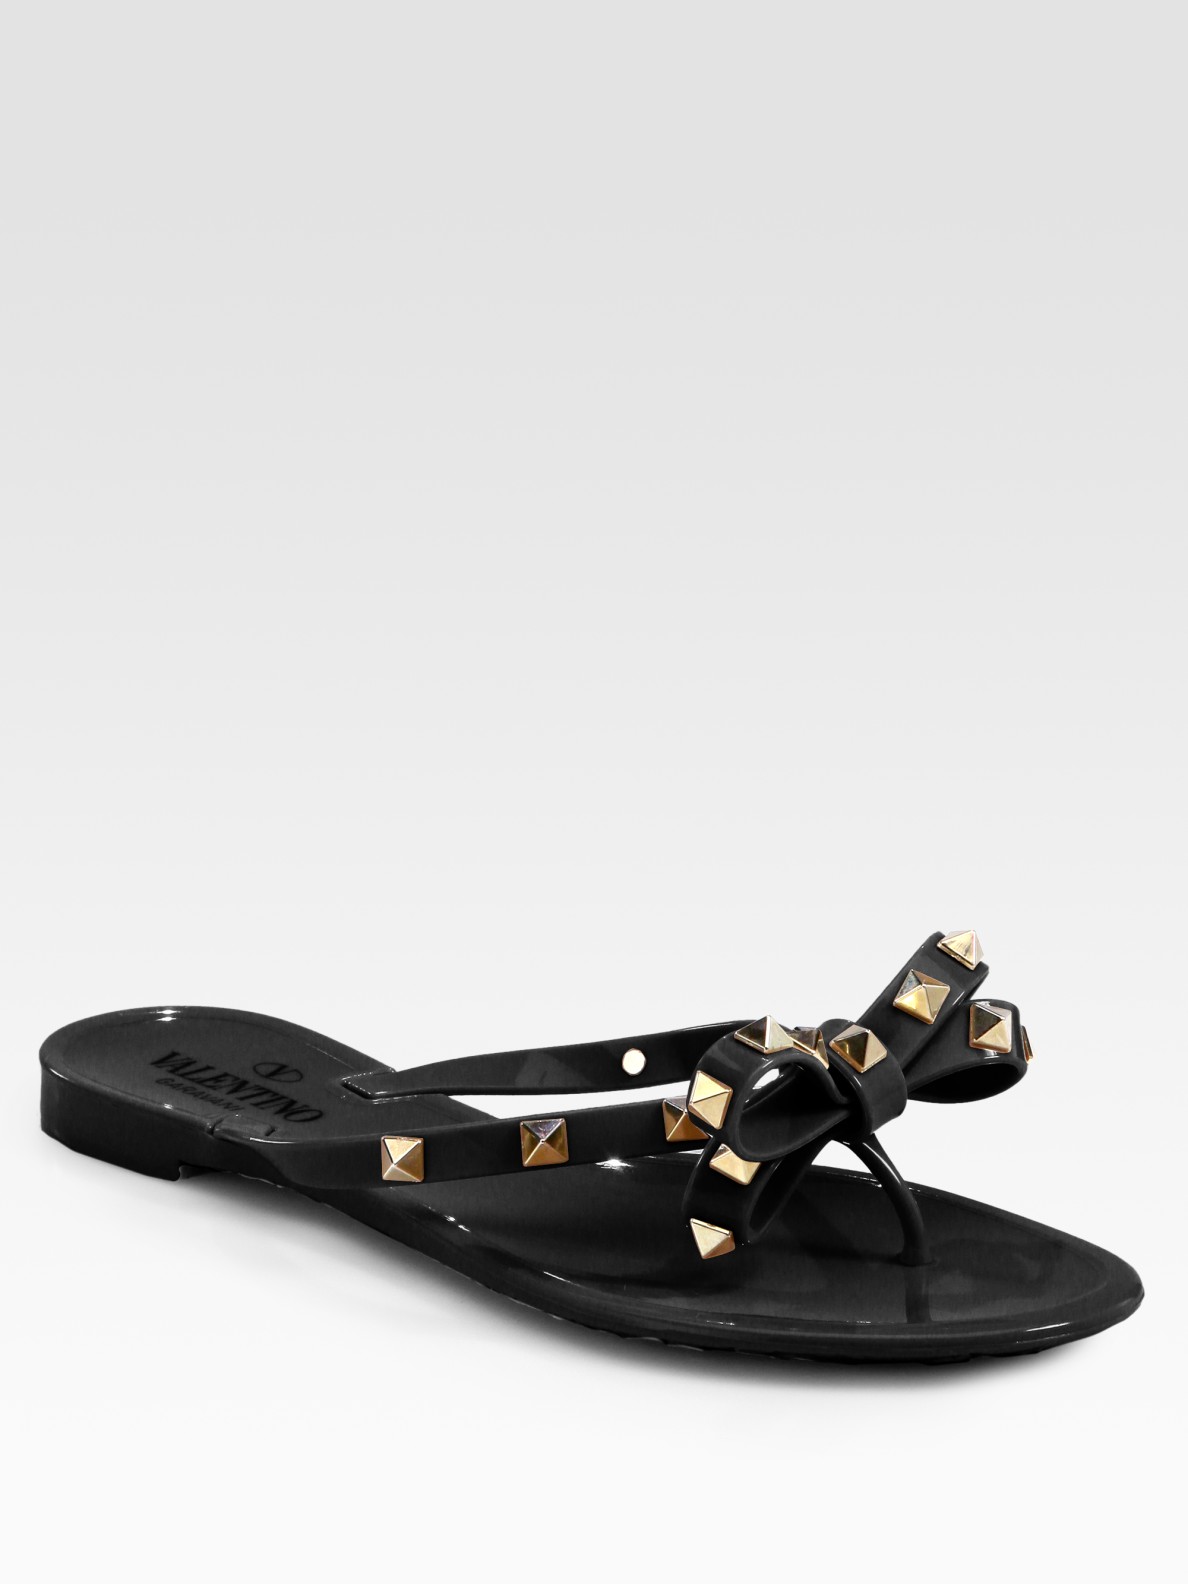 Valentino Rockstud Studded Thong Bow Jelly Flip Flops in Black - Lyst